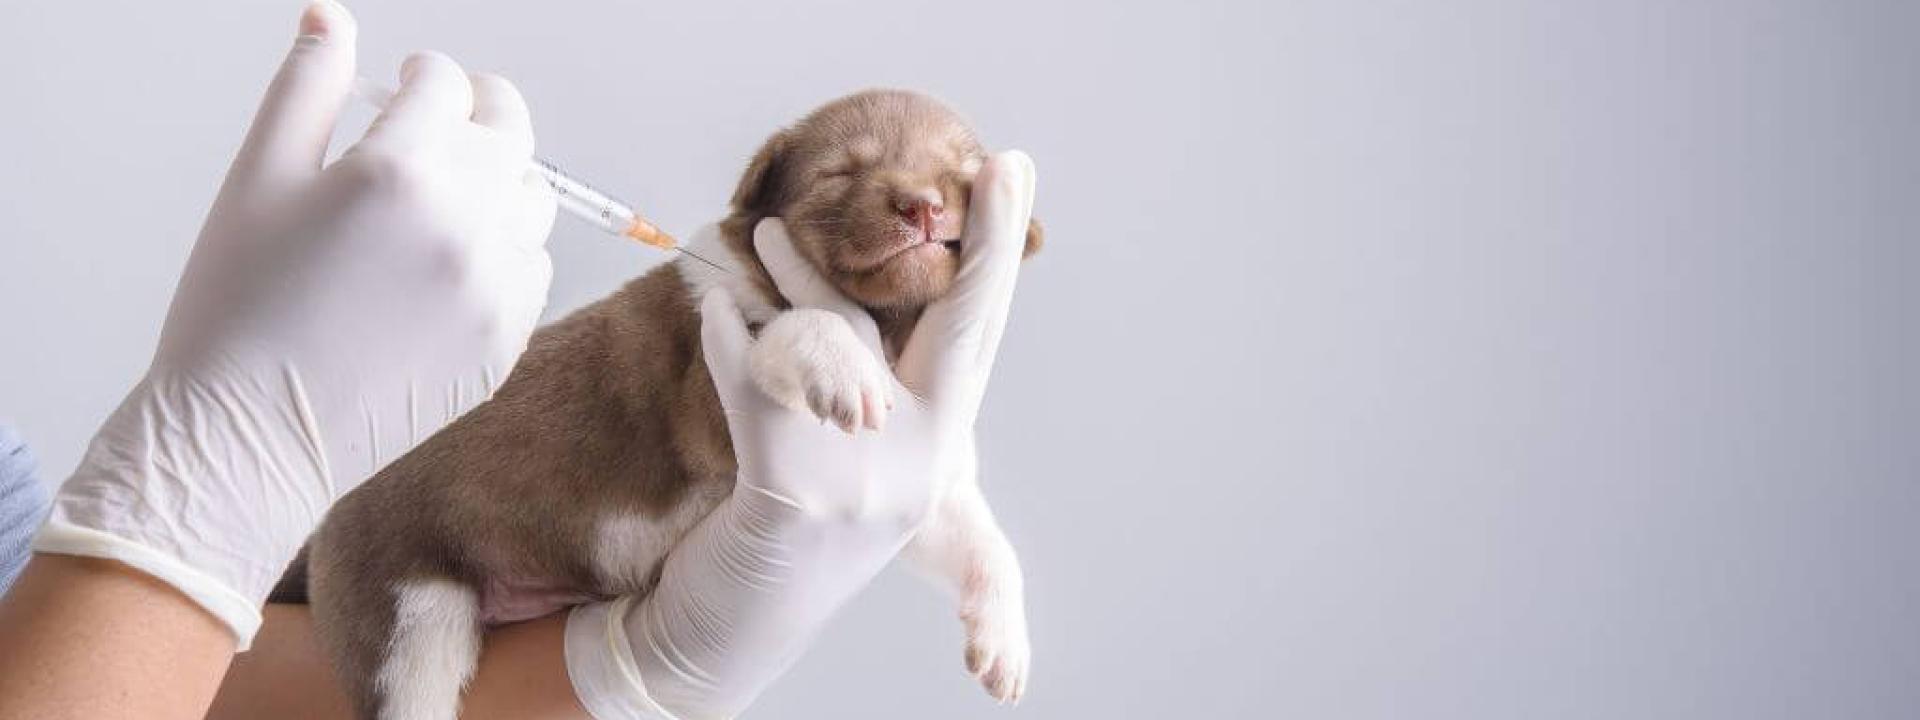 dog vaccination info for national pet immunization month